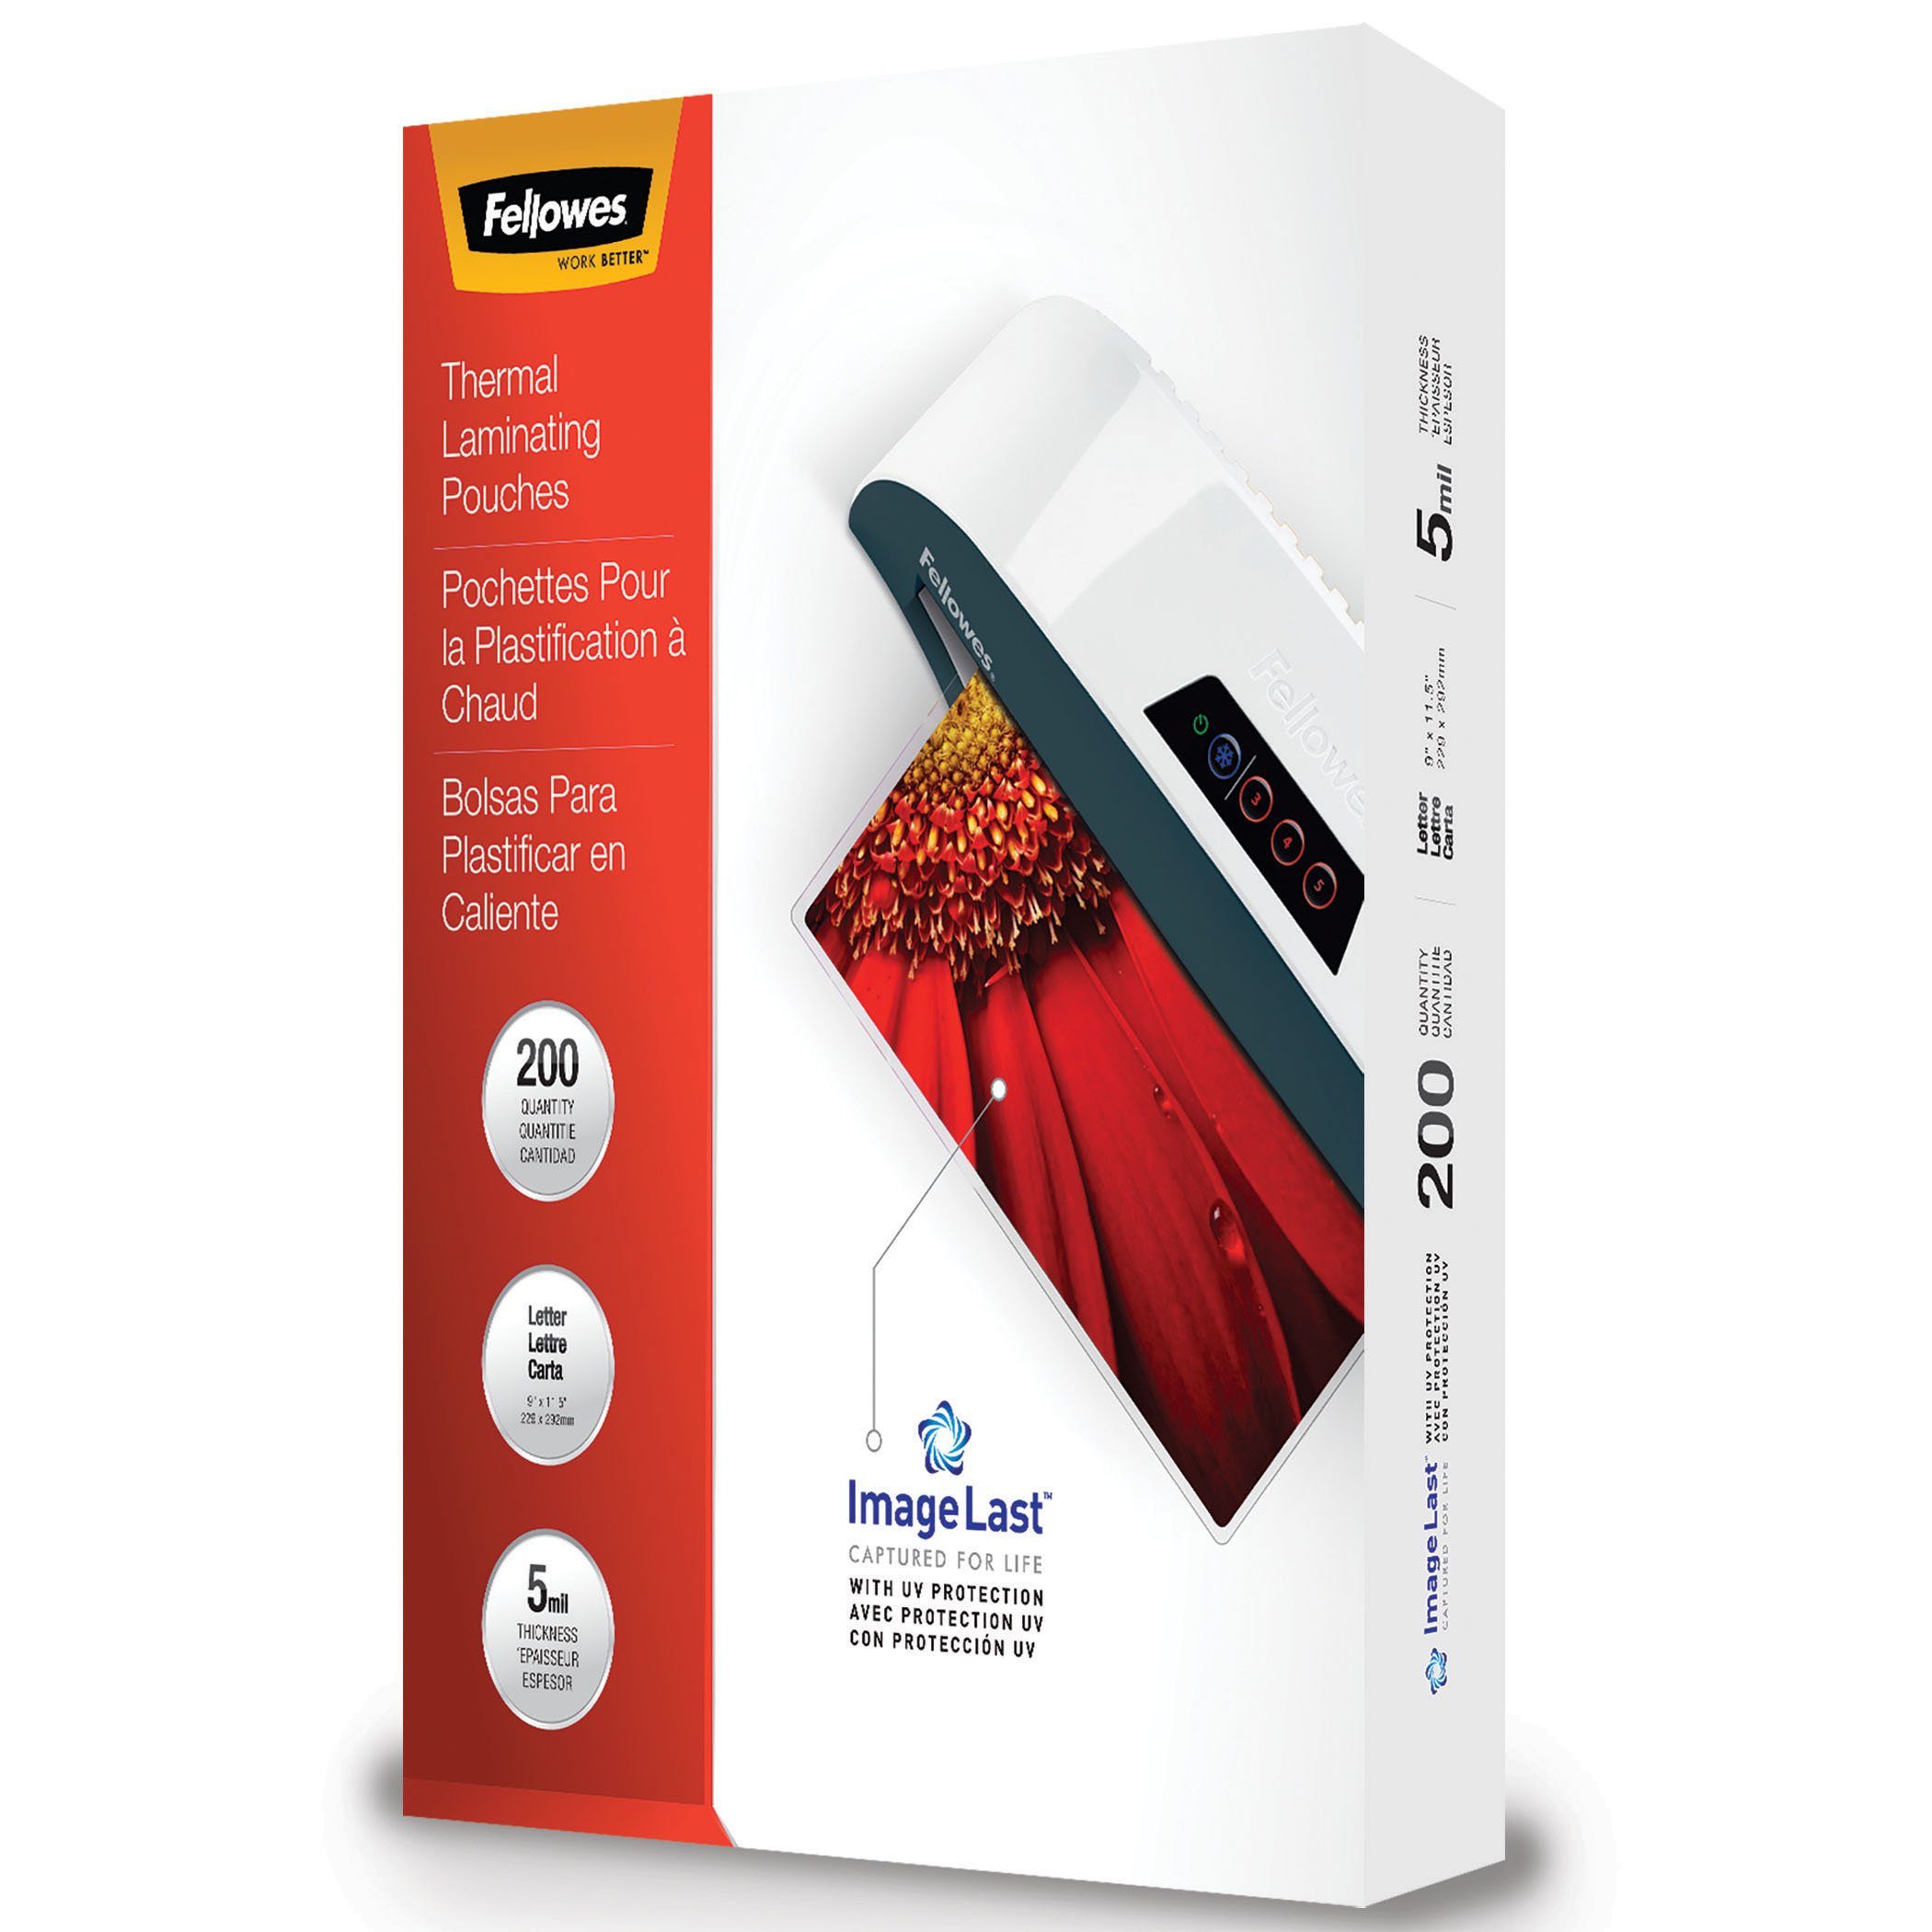 Fellowes Thermal Laminating Pouches, ImageLast, Jam Free, Letter Size, 5 Mil, 200 Pack (5245301)